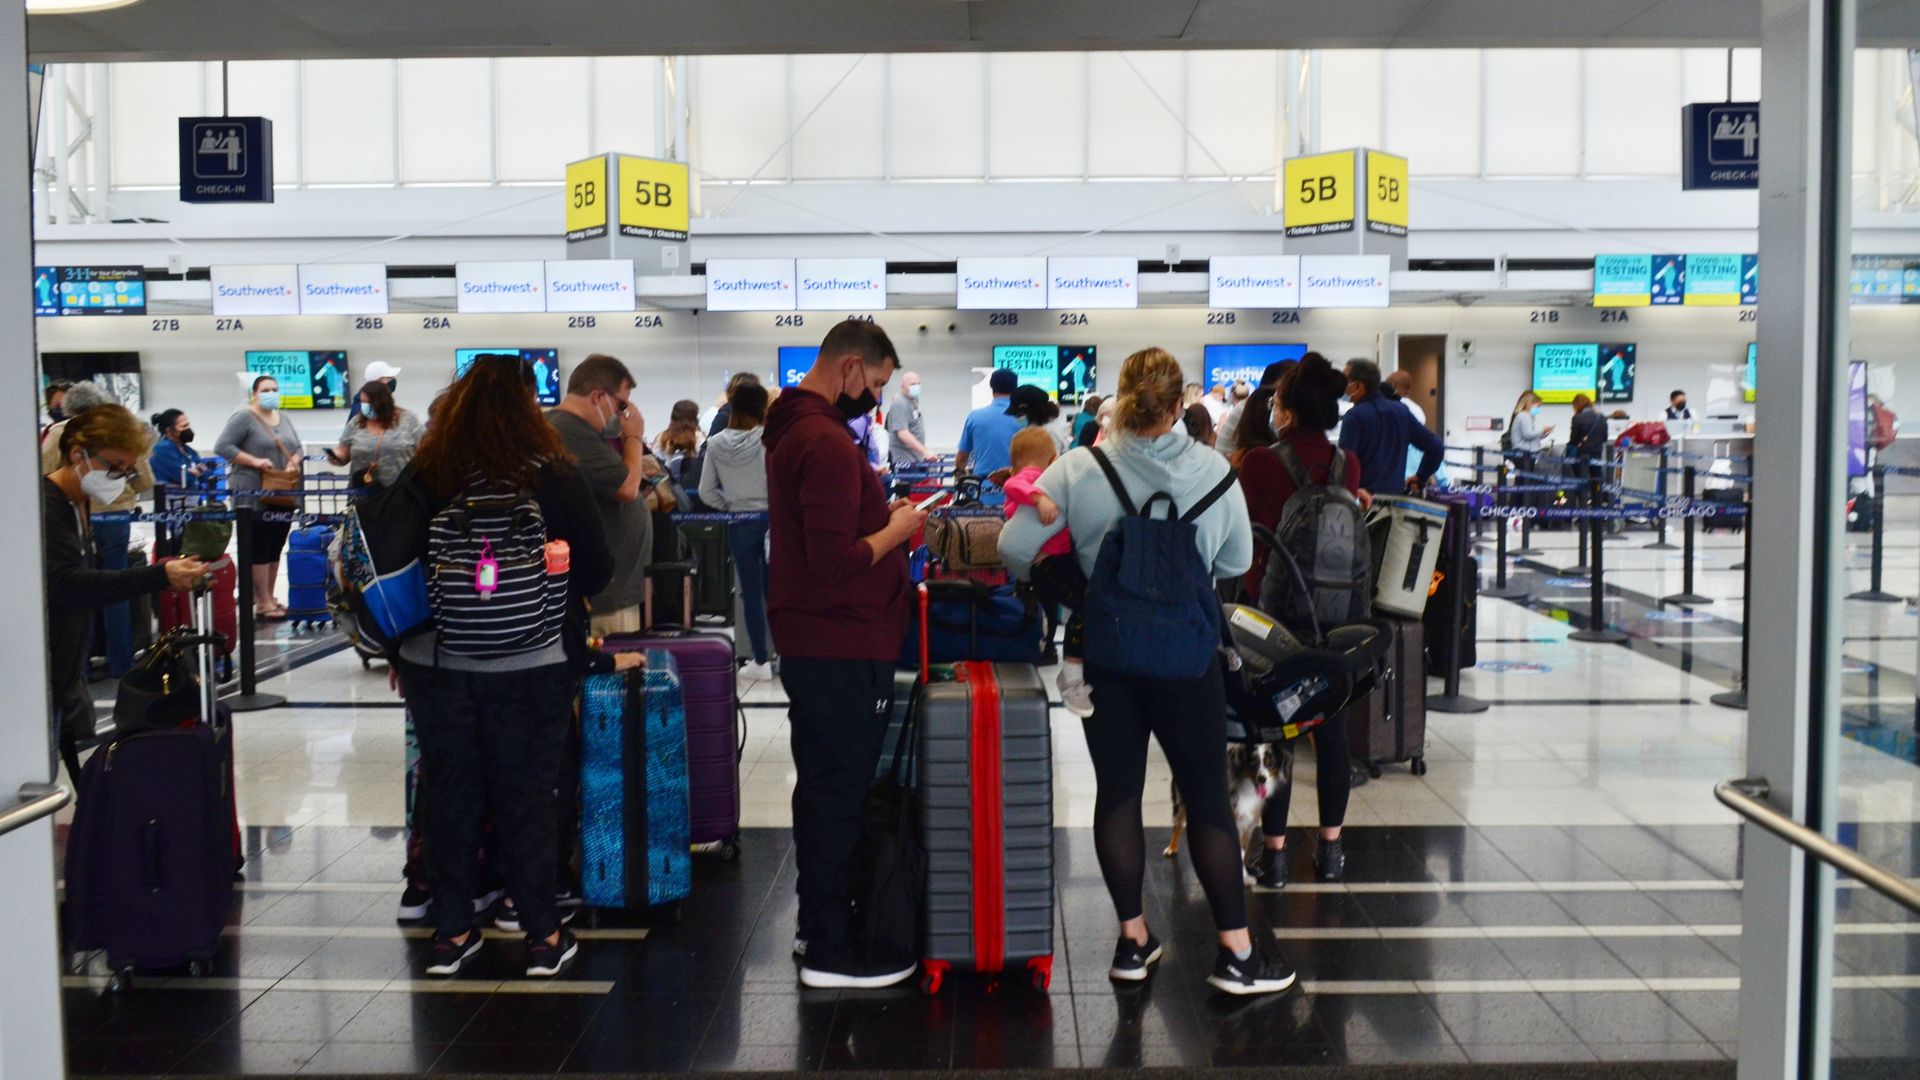 People wait in line to receive information on their flights at Chicago O'Hare International Airport 